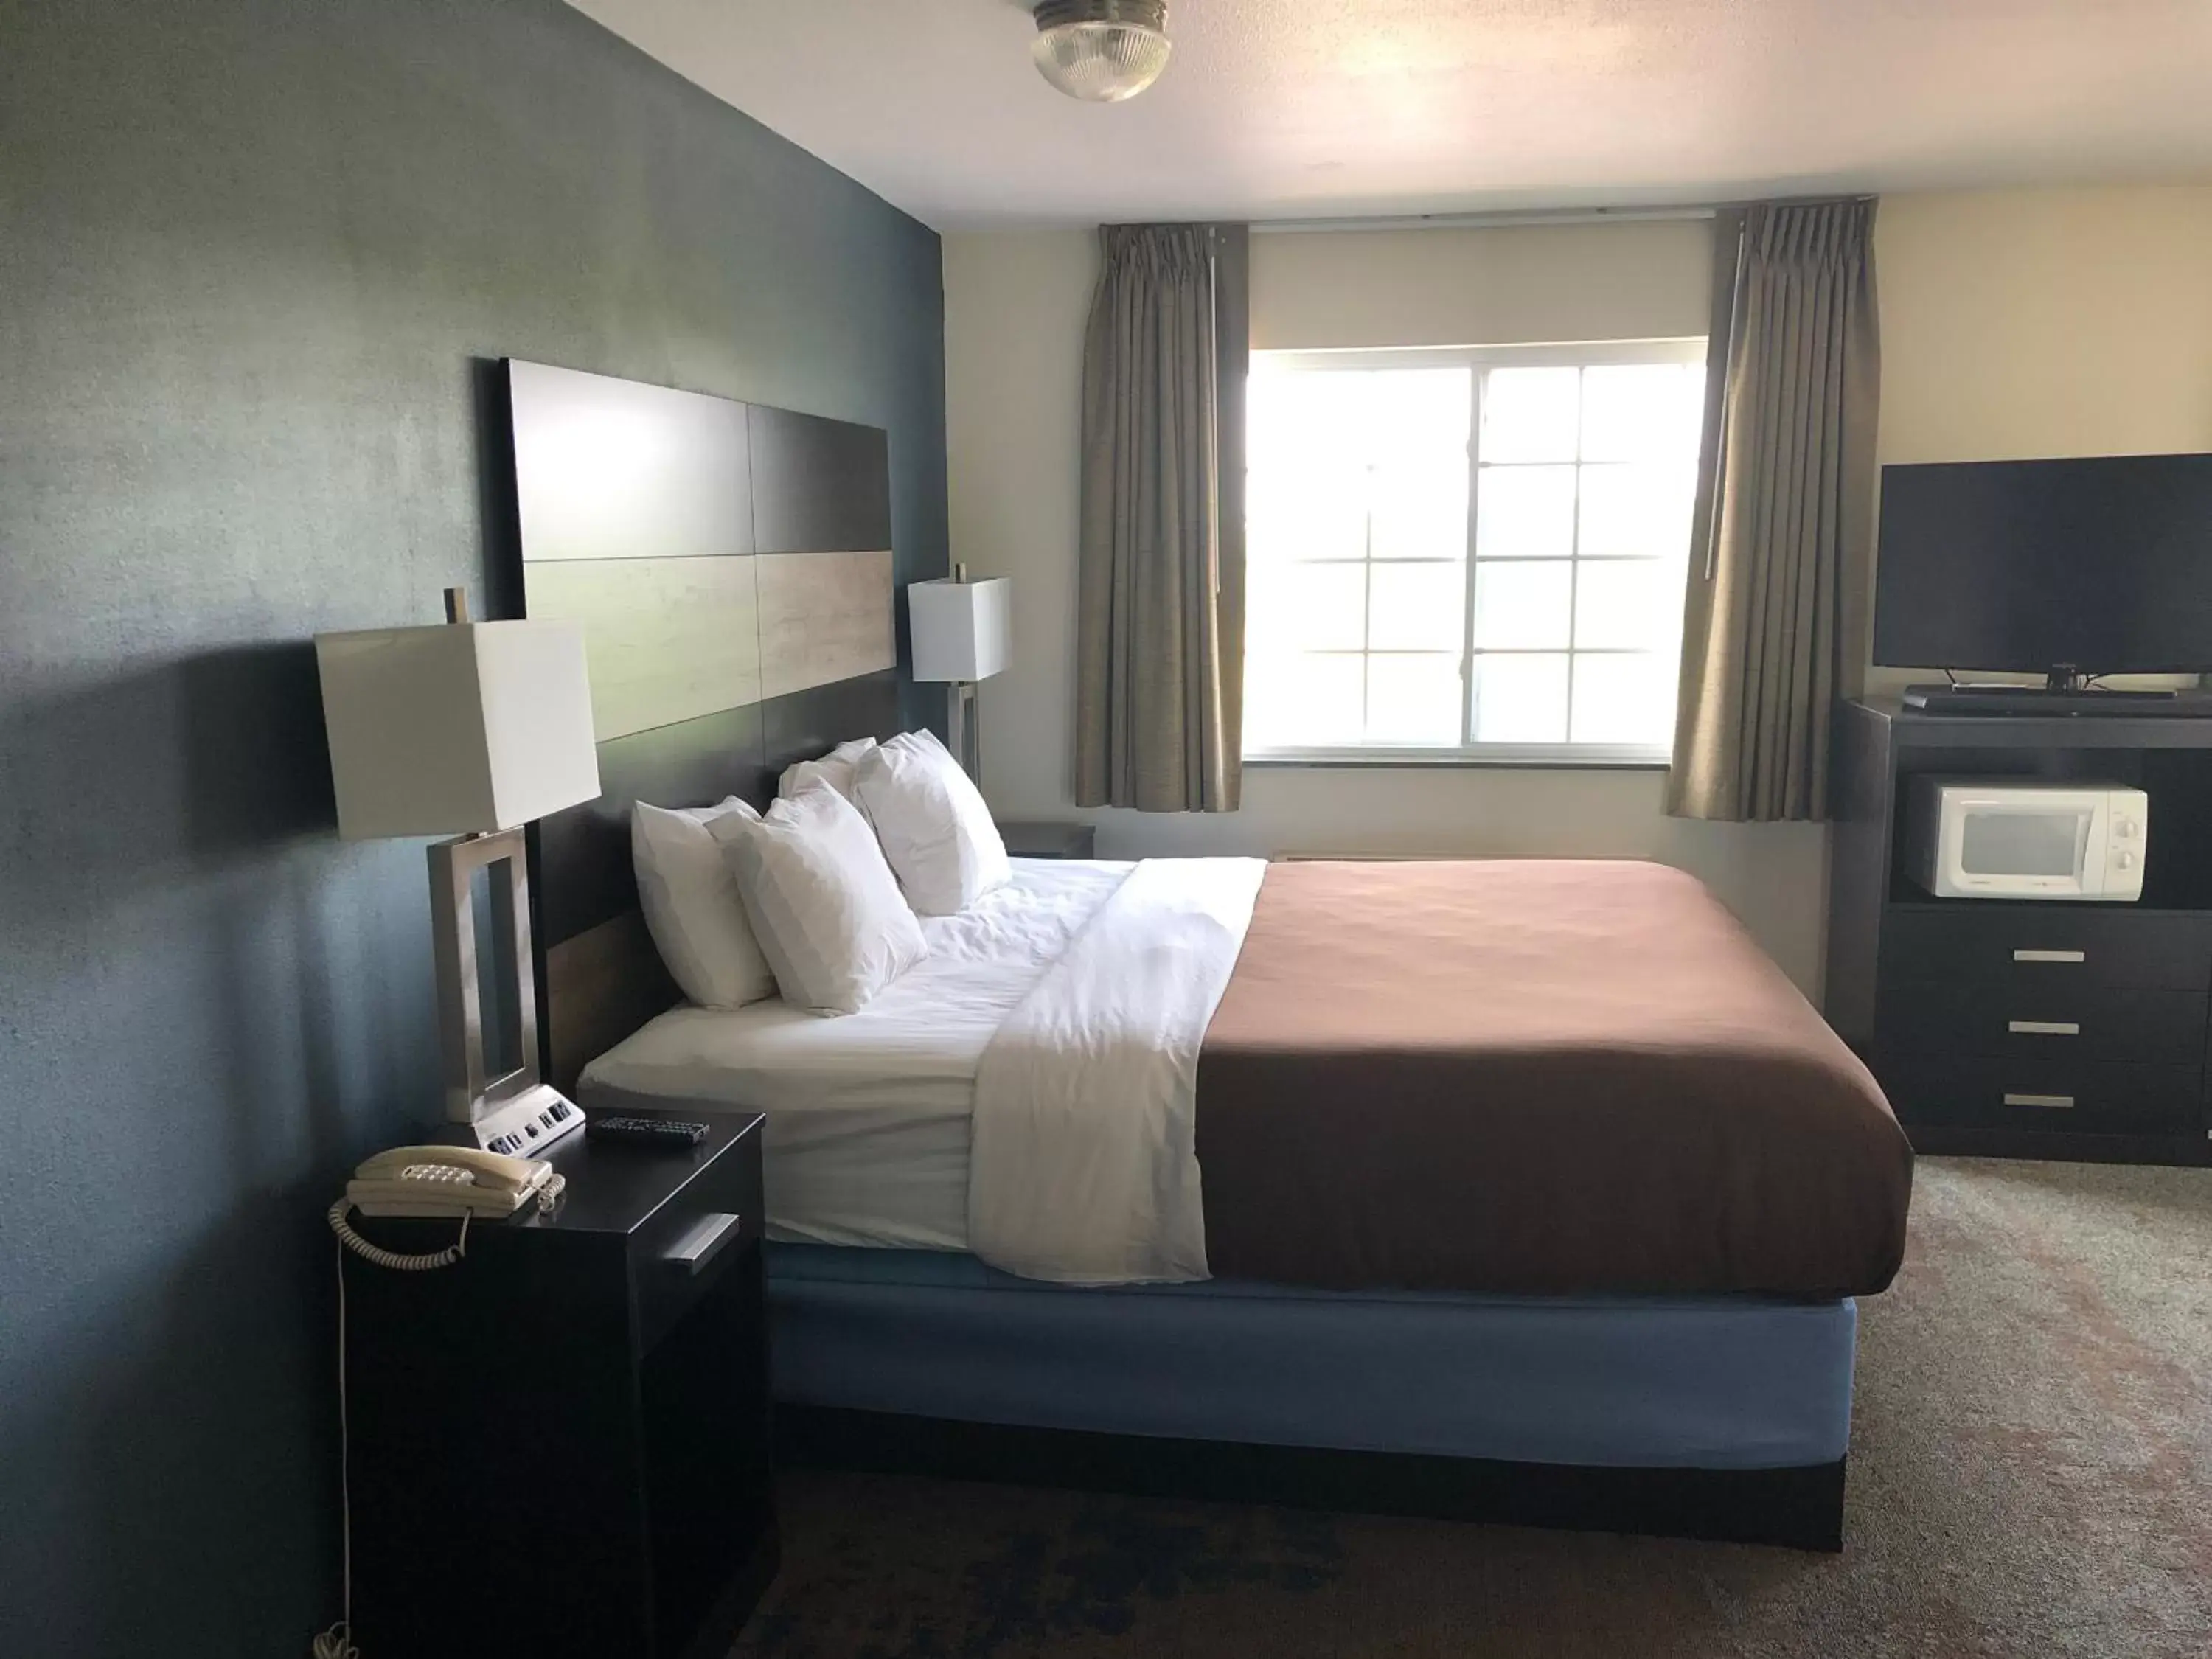 Guests, Bed in AmericInn by Wyndham Maquoketa